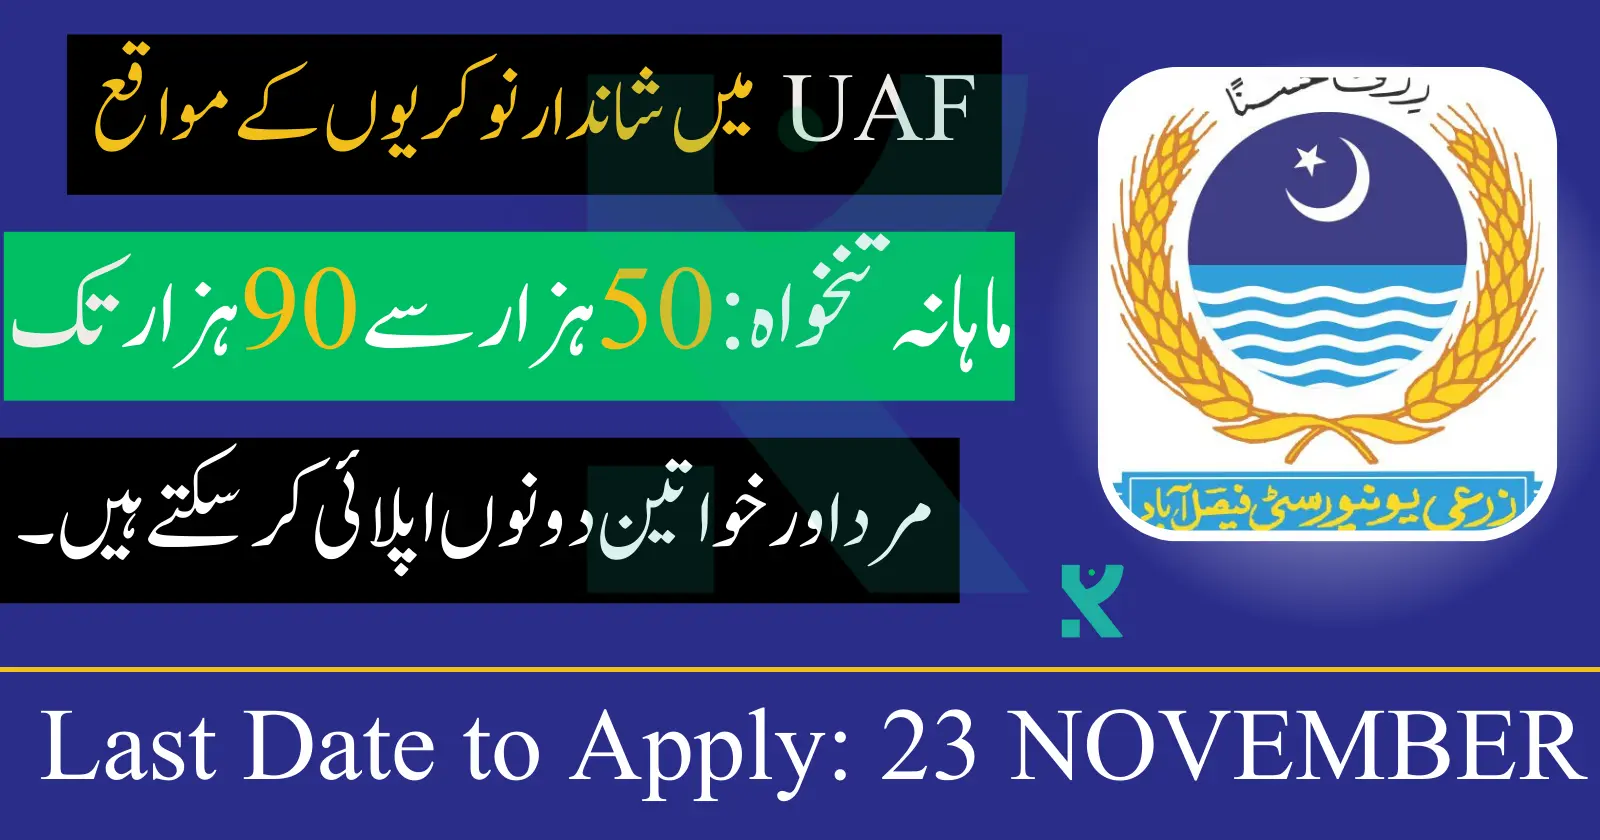 University of Agriculture Faisalabad (UAF Jobs) is hiring!